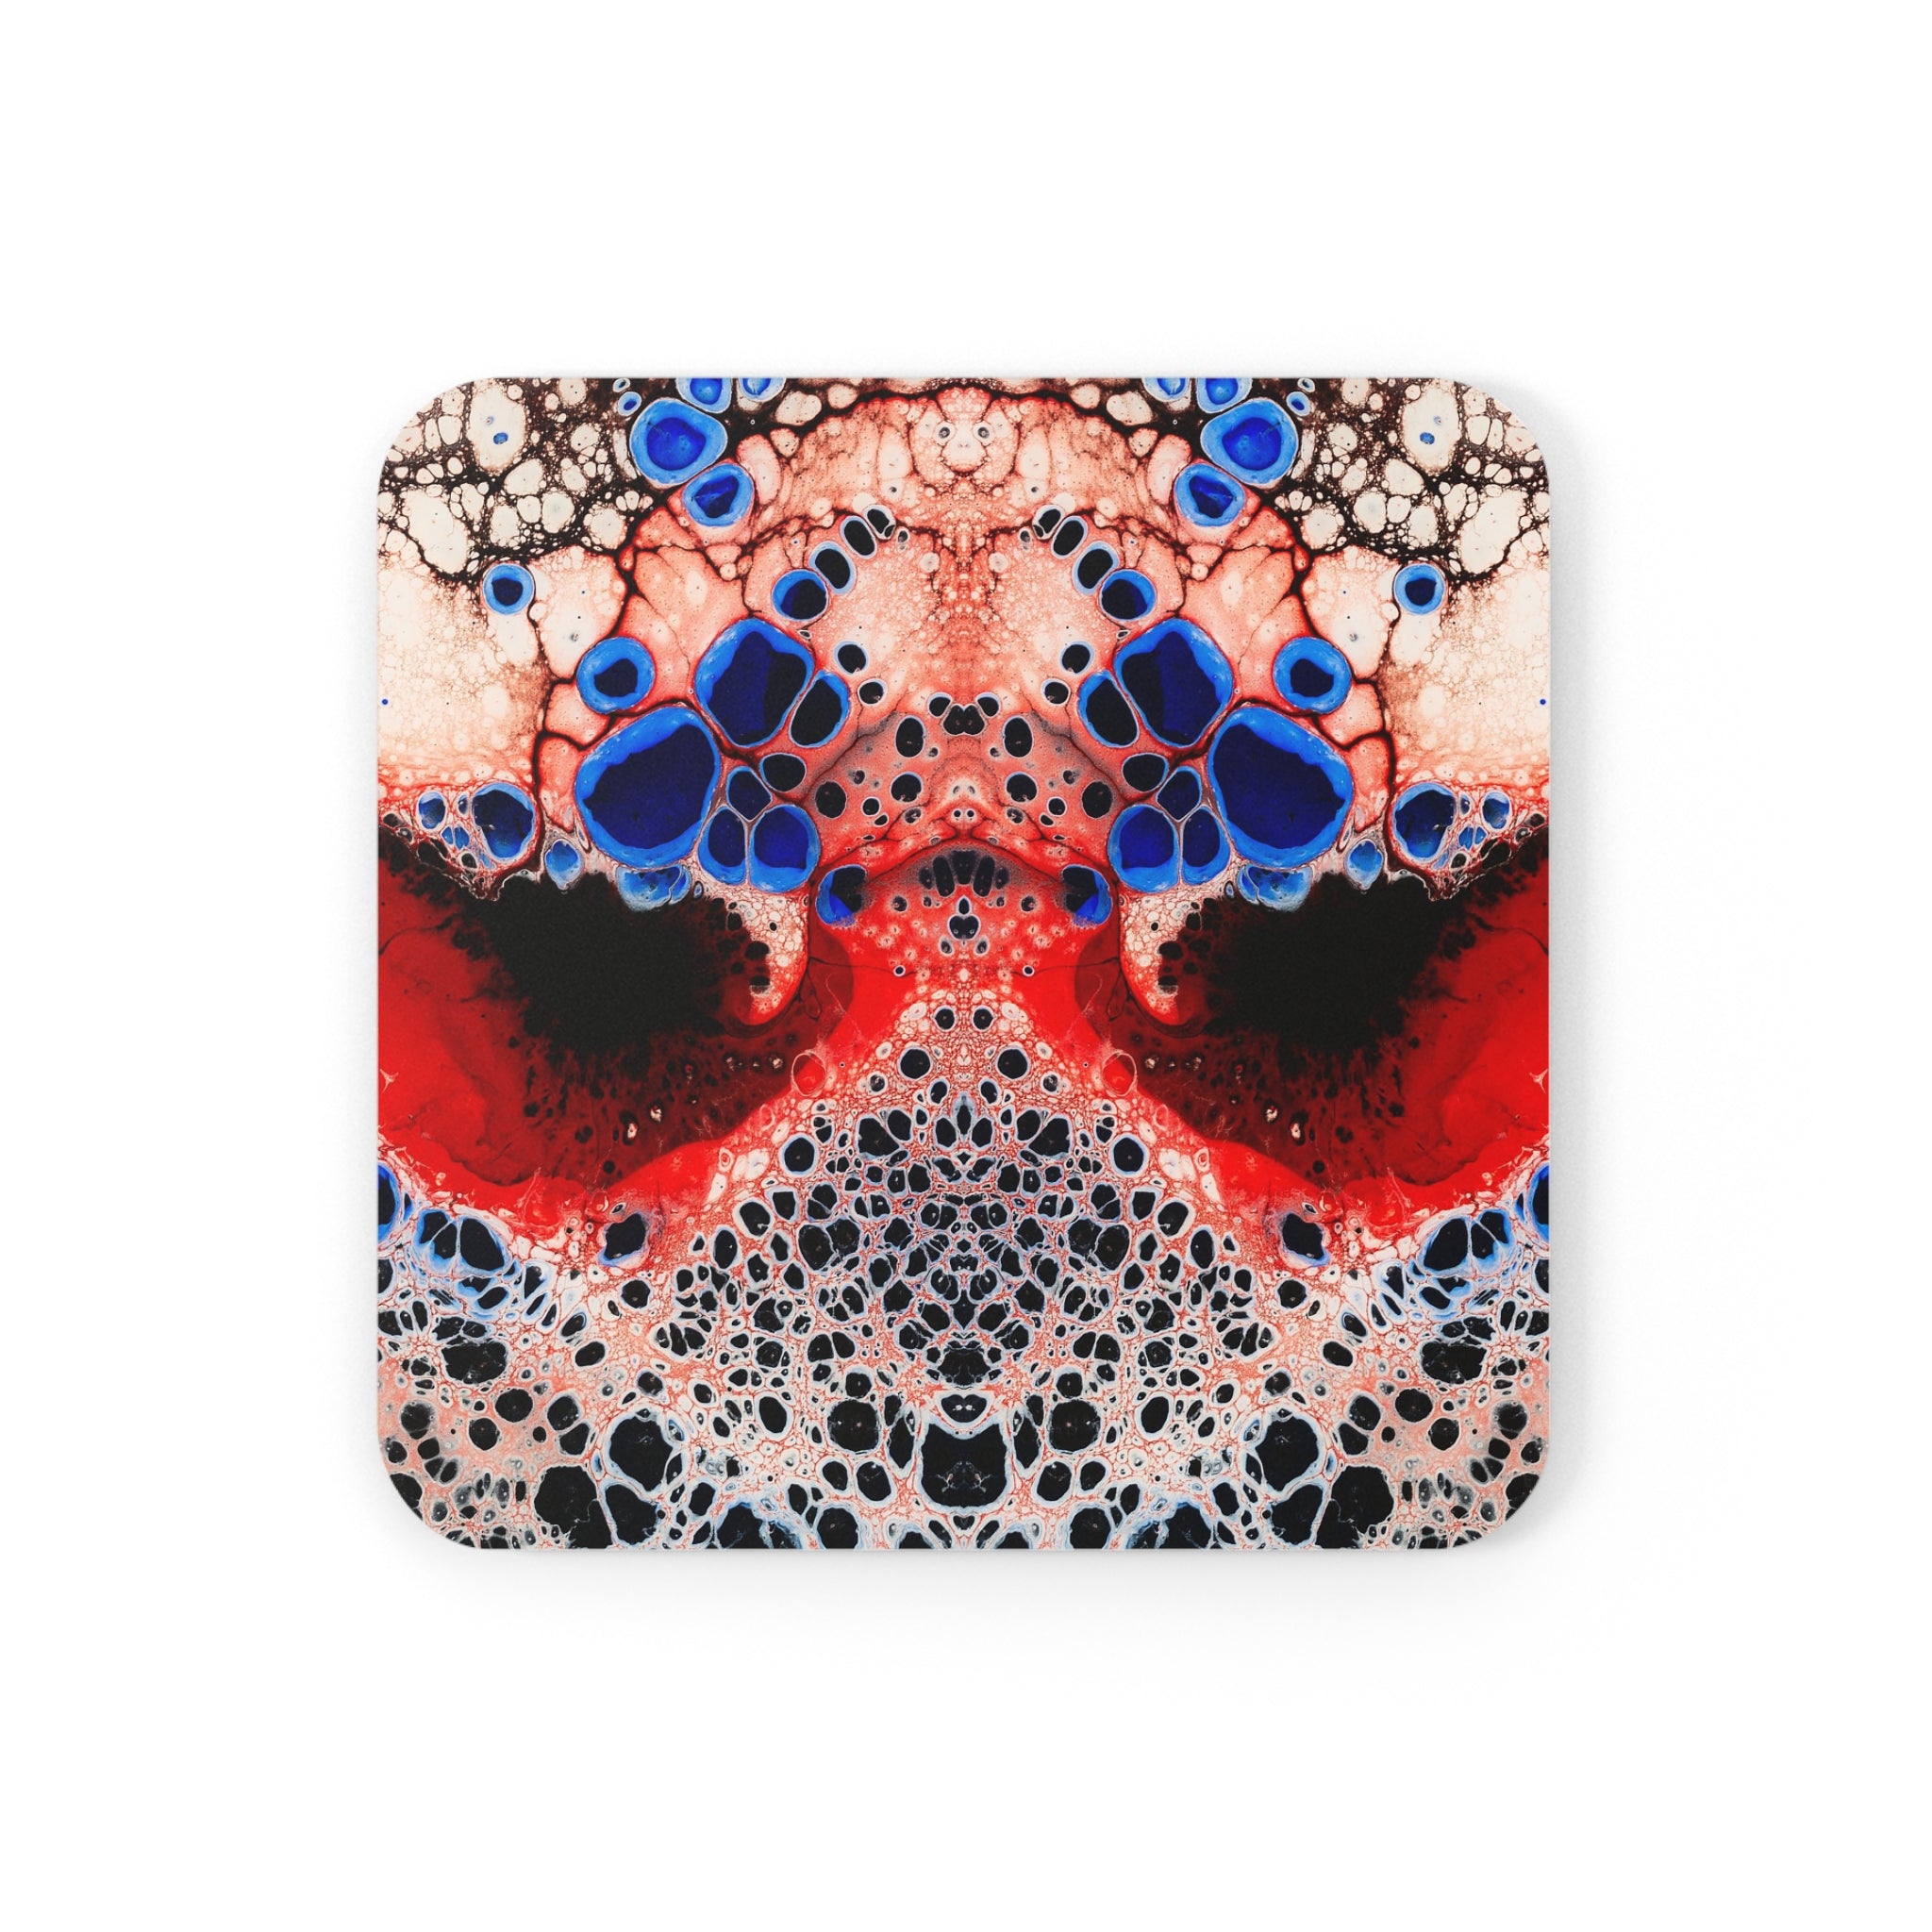 Cameron Creations - Abyss Of Emptiness - Stylish Coffee Coaster -  Square Front